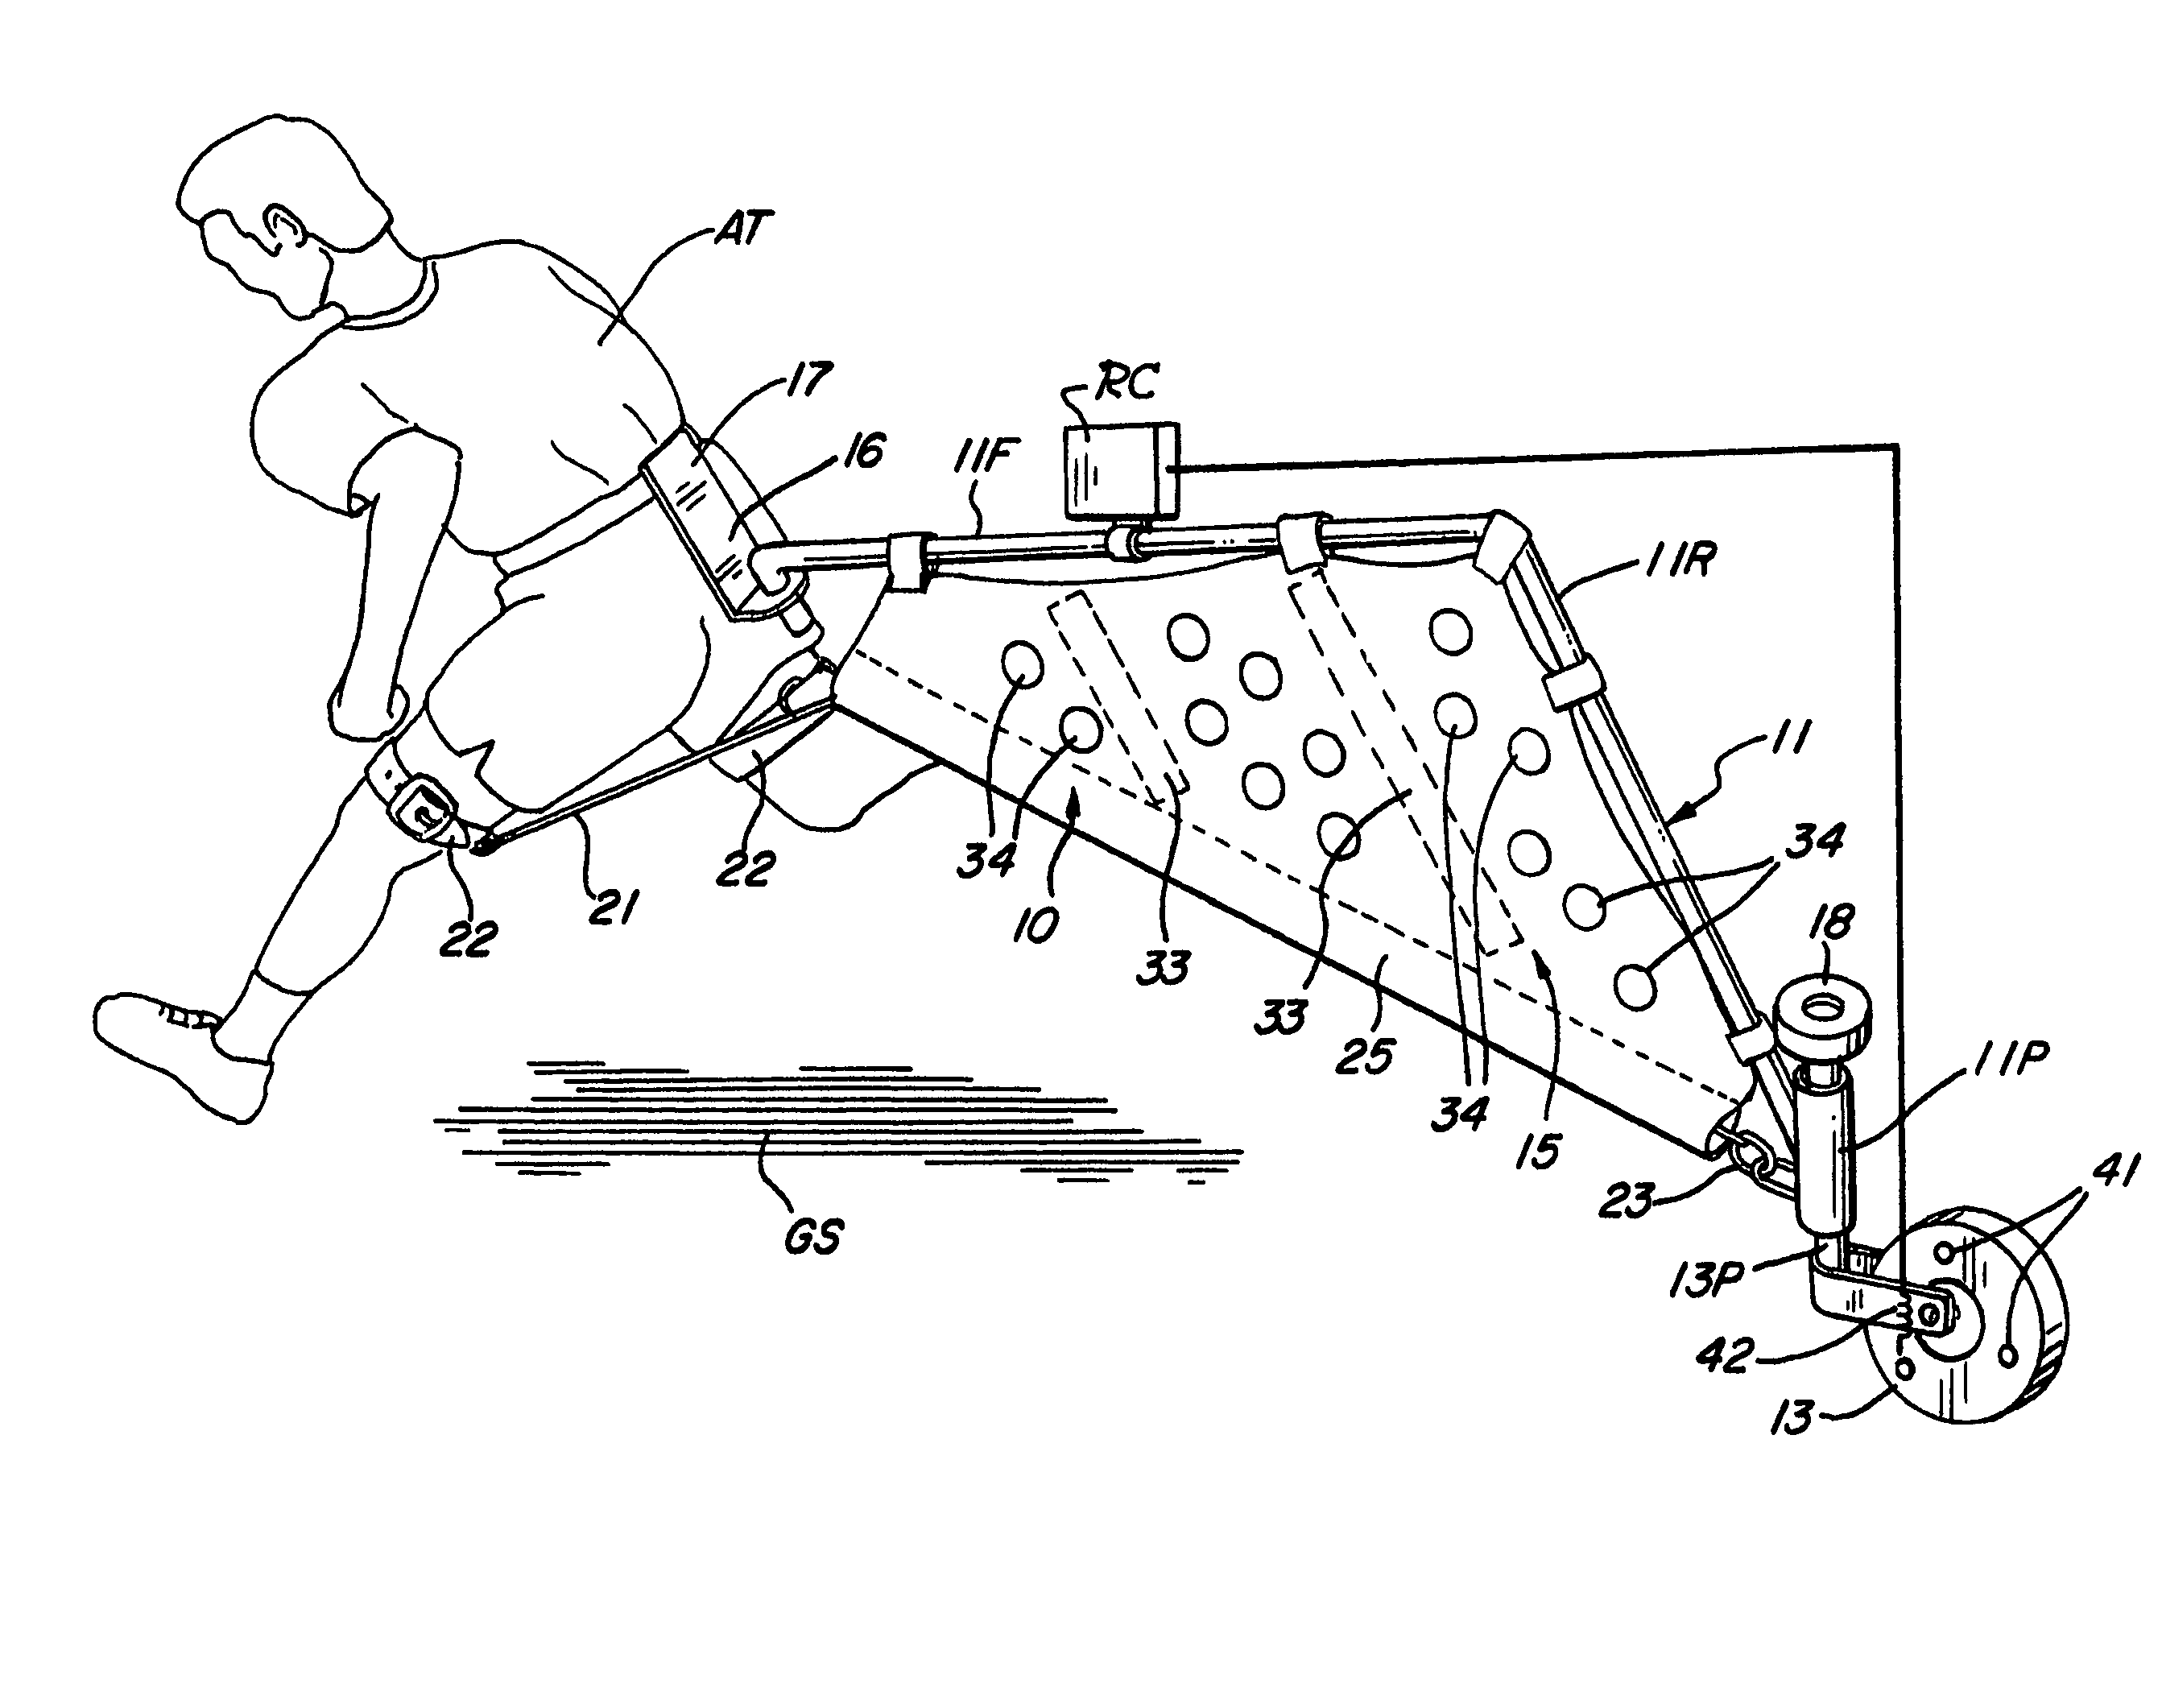 Speed and resistance apparatus